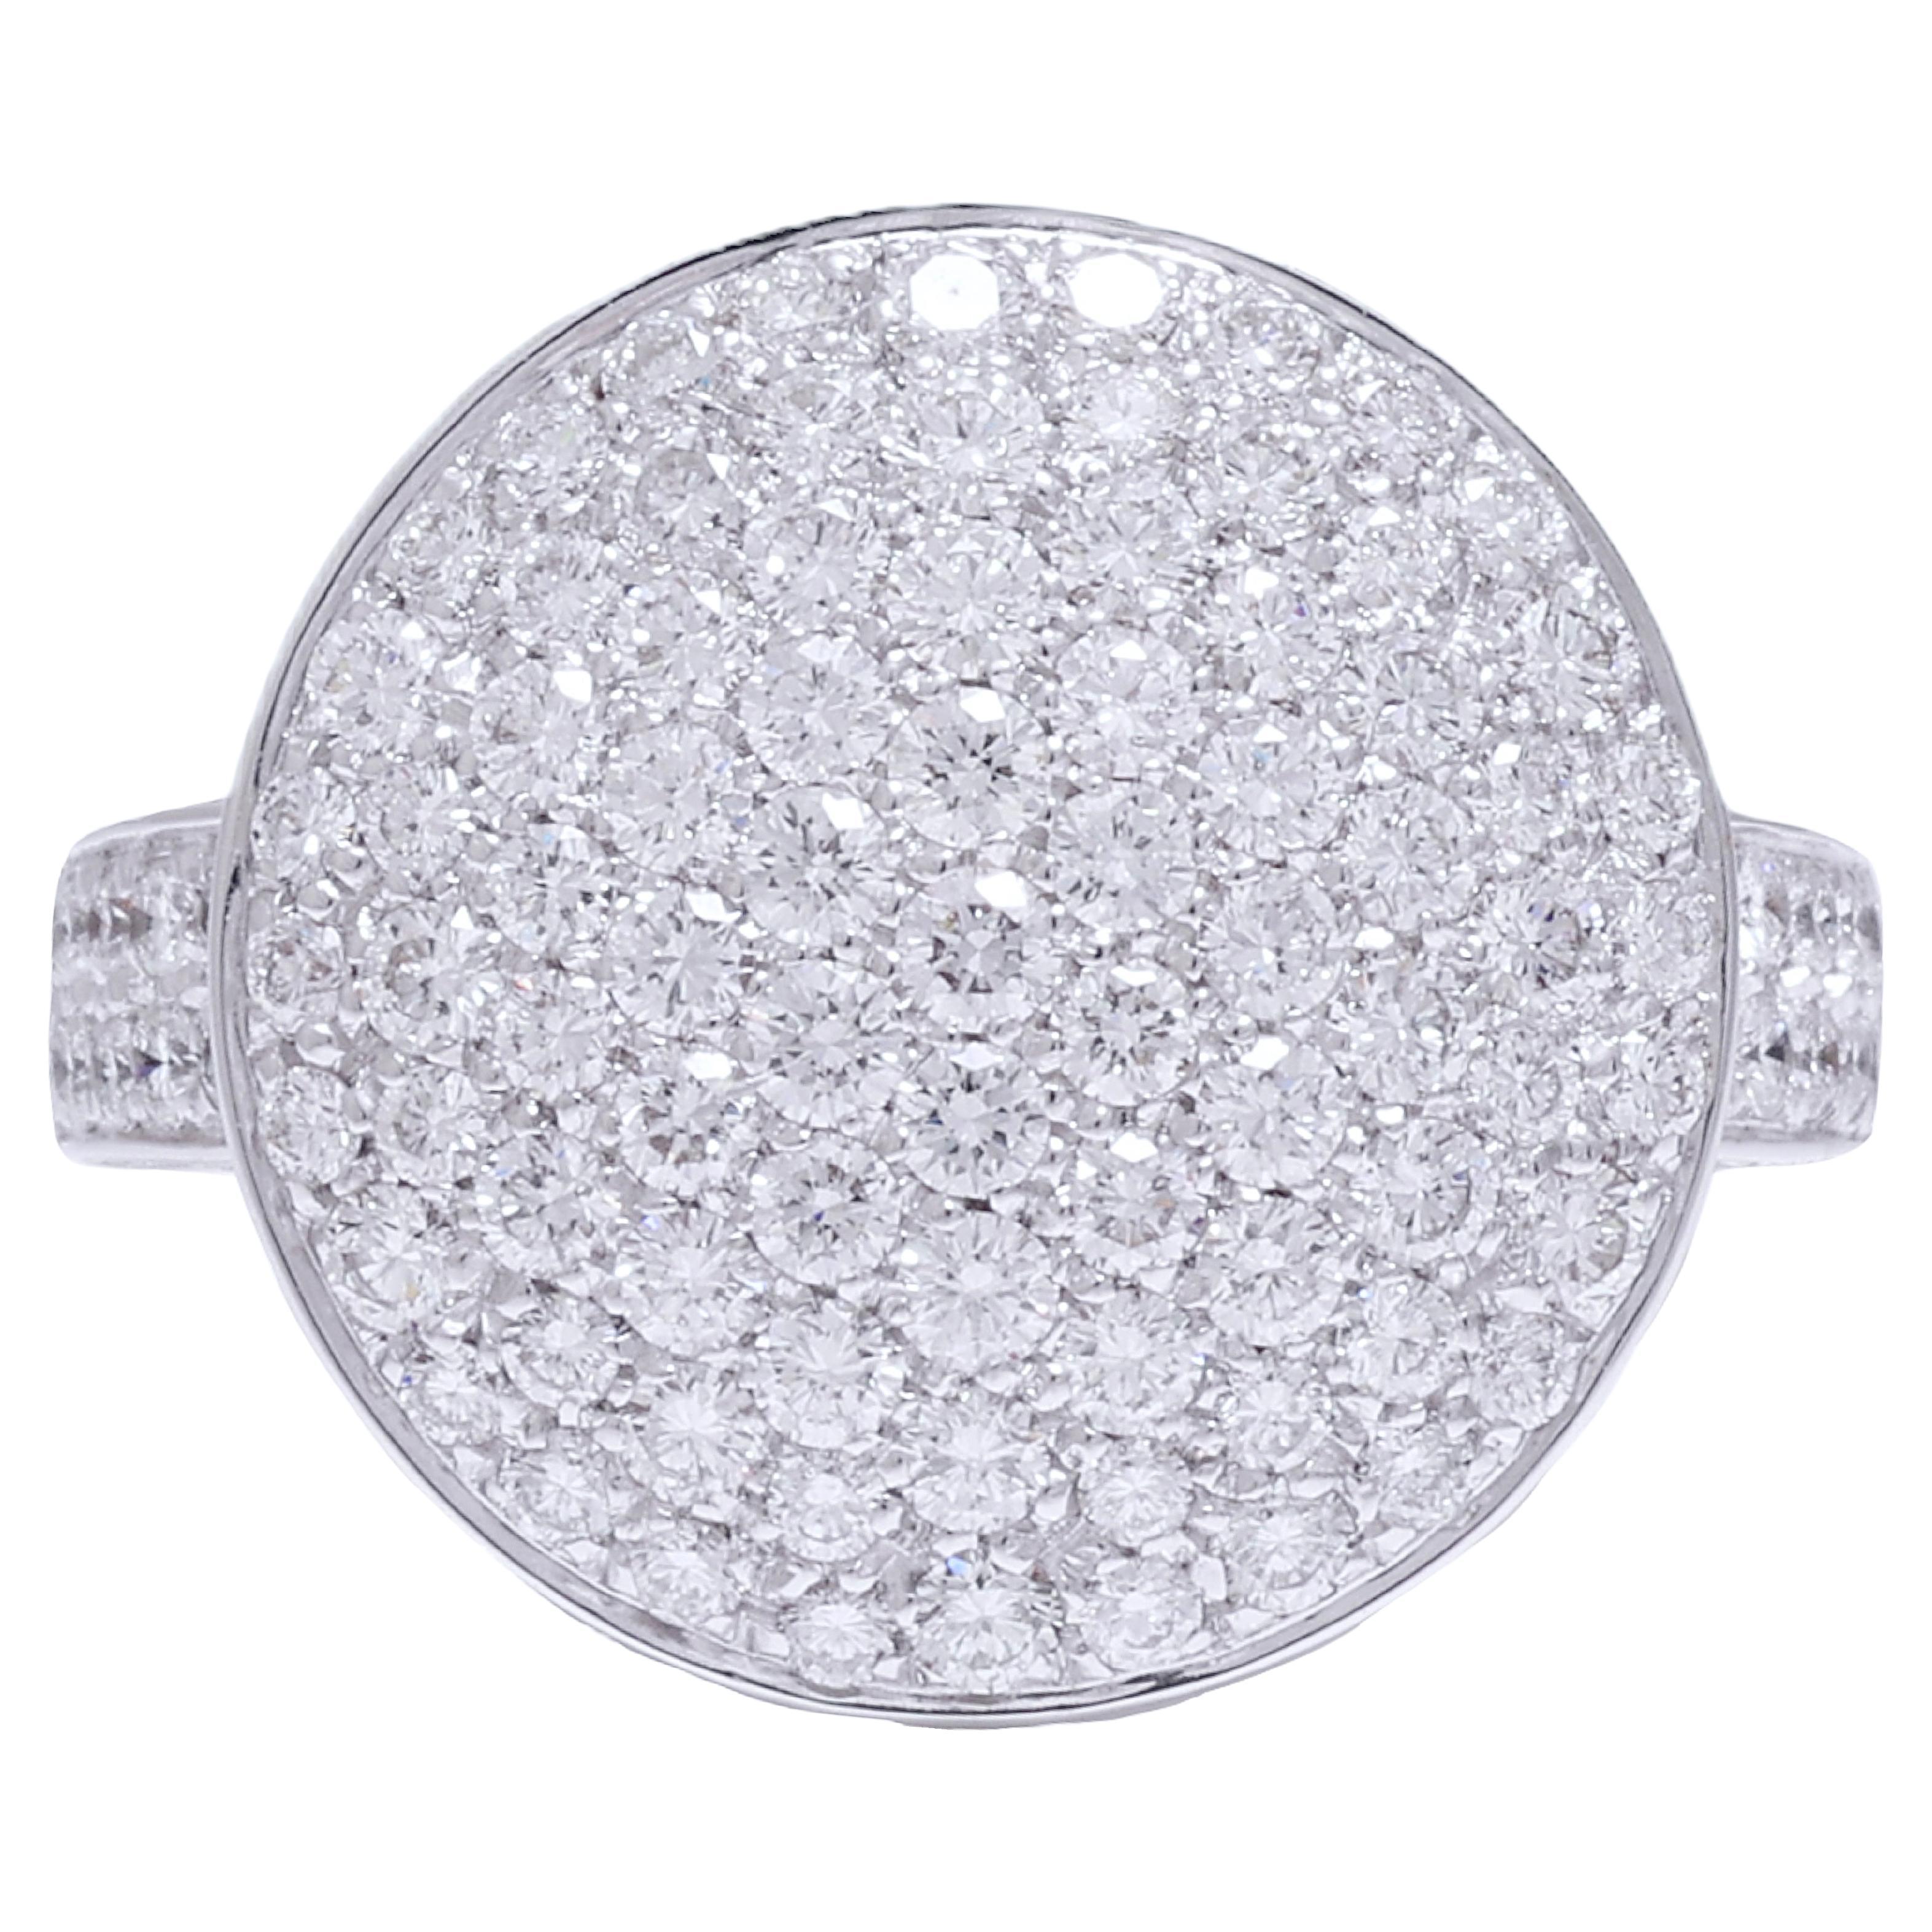 18 kt. White Gold Ring With 2.32 ct. Brilliant Cut Diamonds